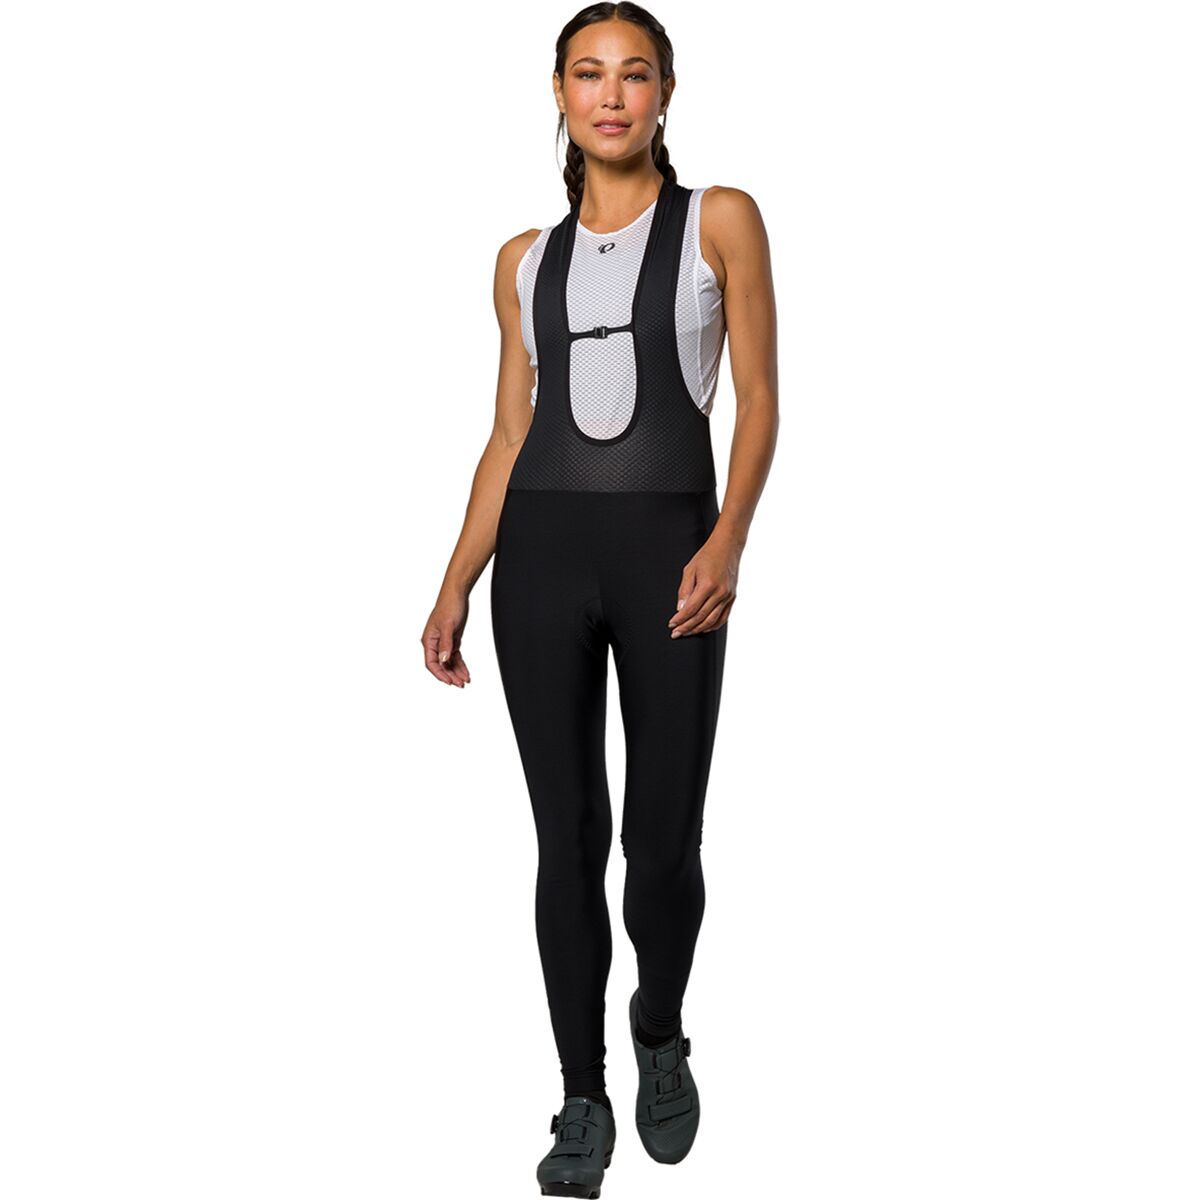 PEARL iZUMi Quest Thermal Cycling Tights - Men's